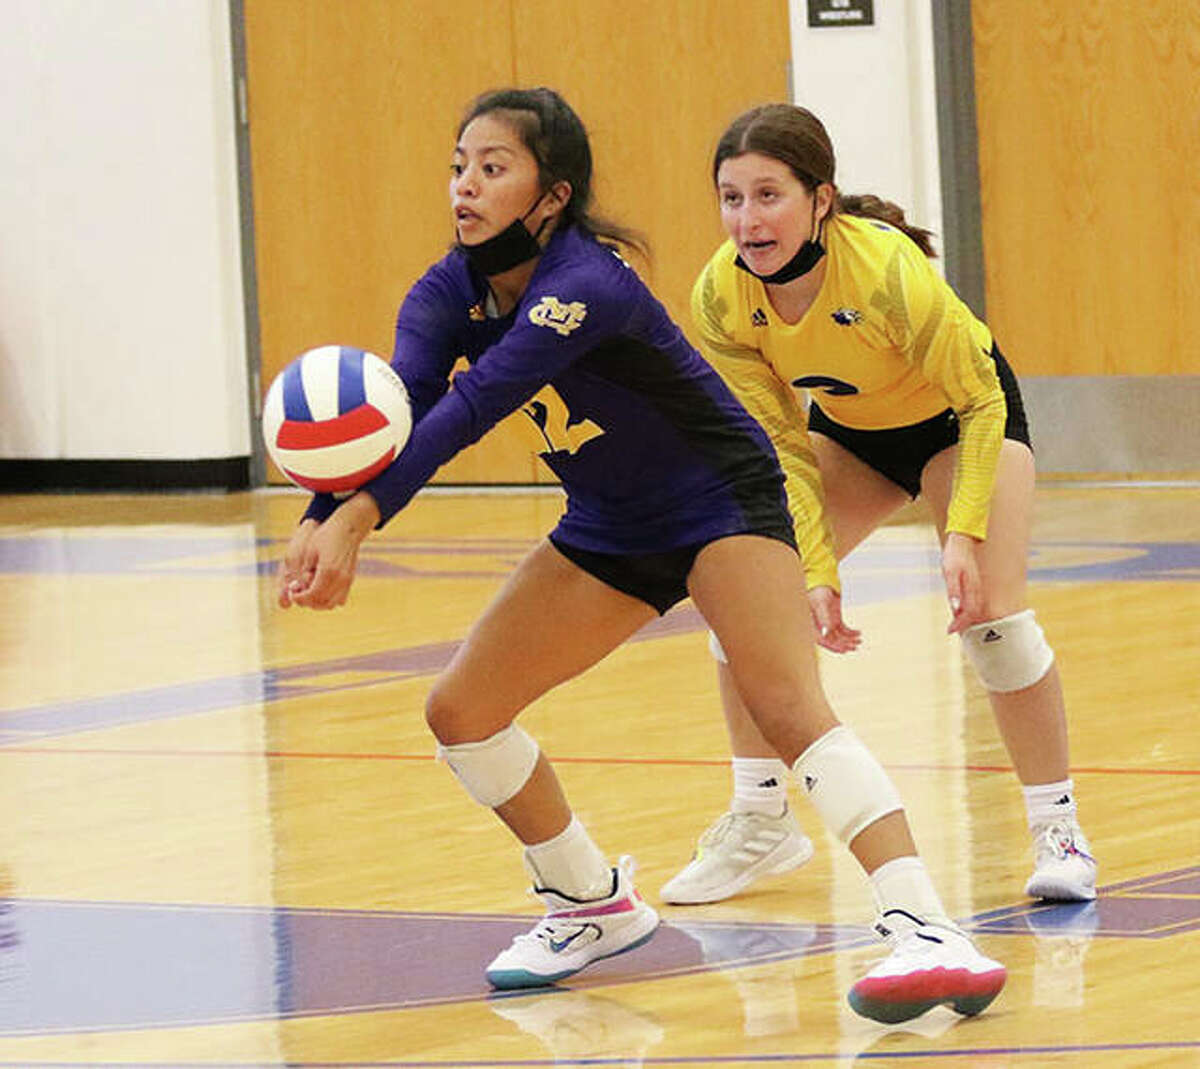 CM libero Ella Middleton (left) receives a serve in front of teammate Toni Reynolds in a match earlier this season. Middleton joined Lexi Biciocchi on the all-tourney team on Saturday while winning the Granite City Tournament.